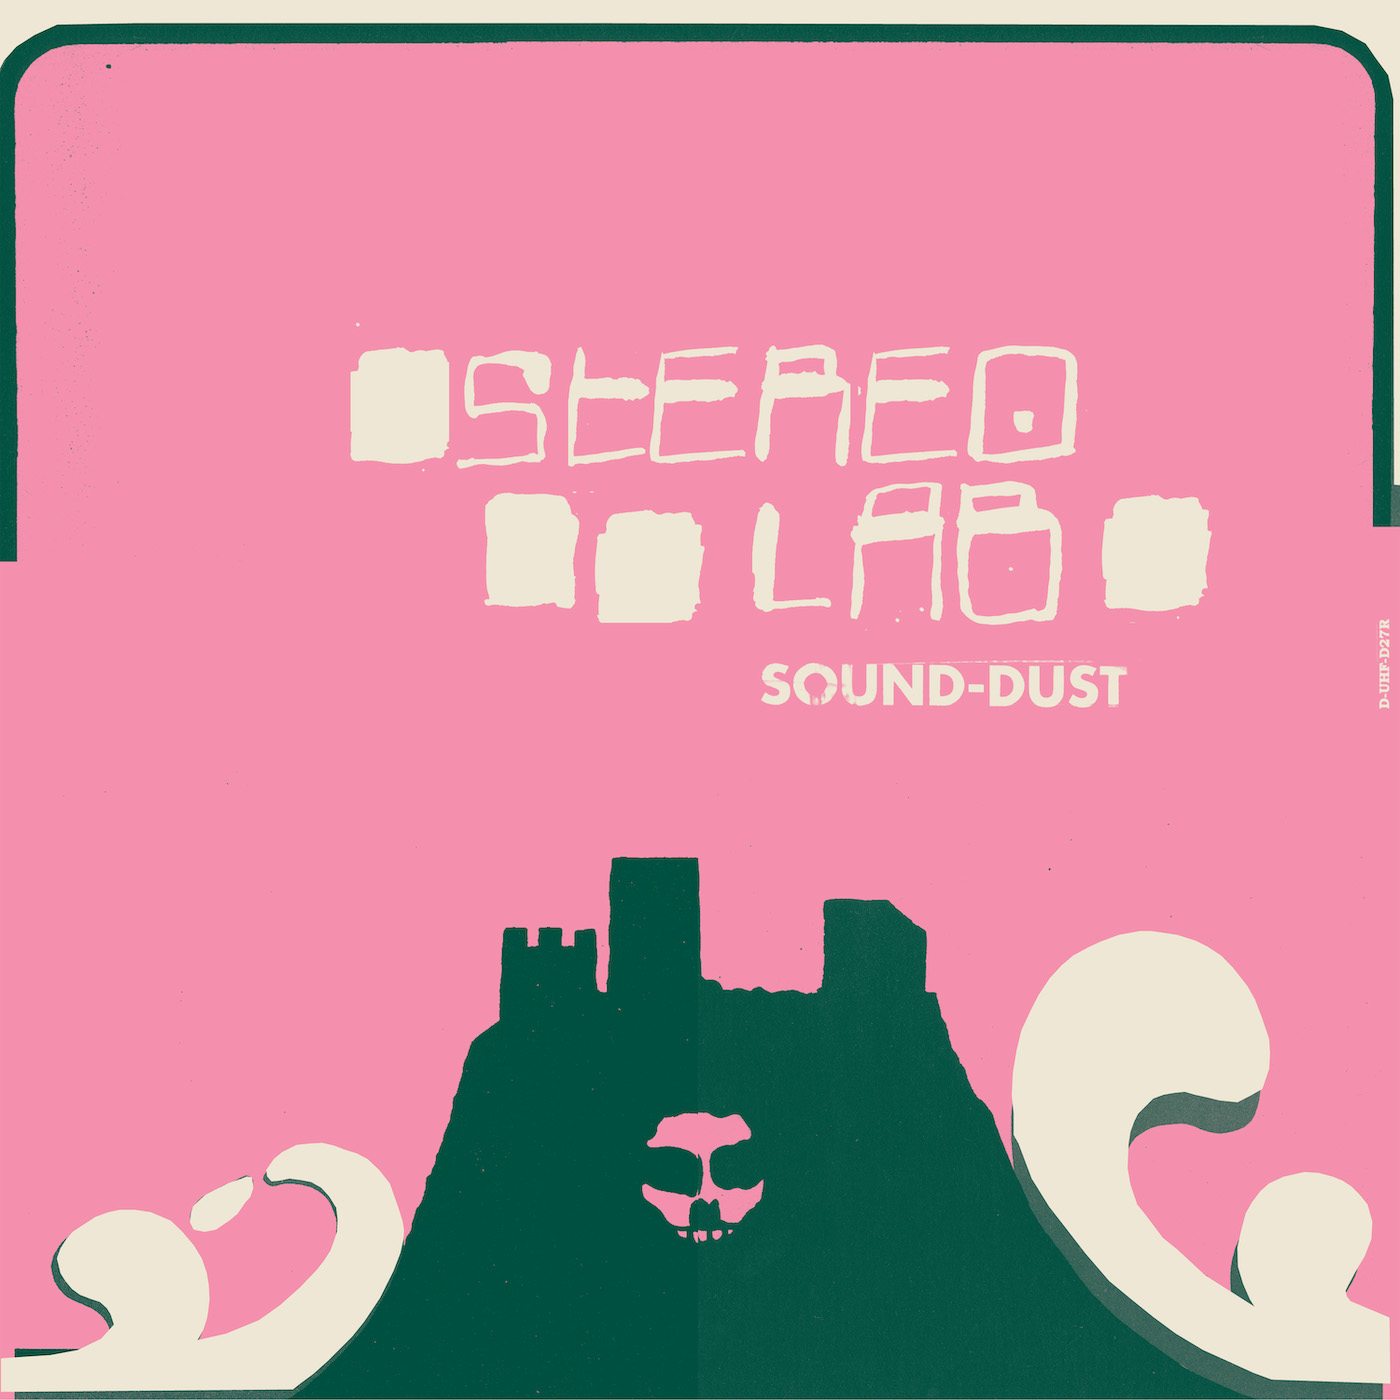 Stereolab - Sound-Dust (Expanded Edition) (2001/2019) [FLAC 24bit/96kHz]